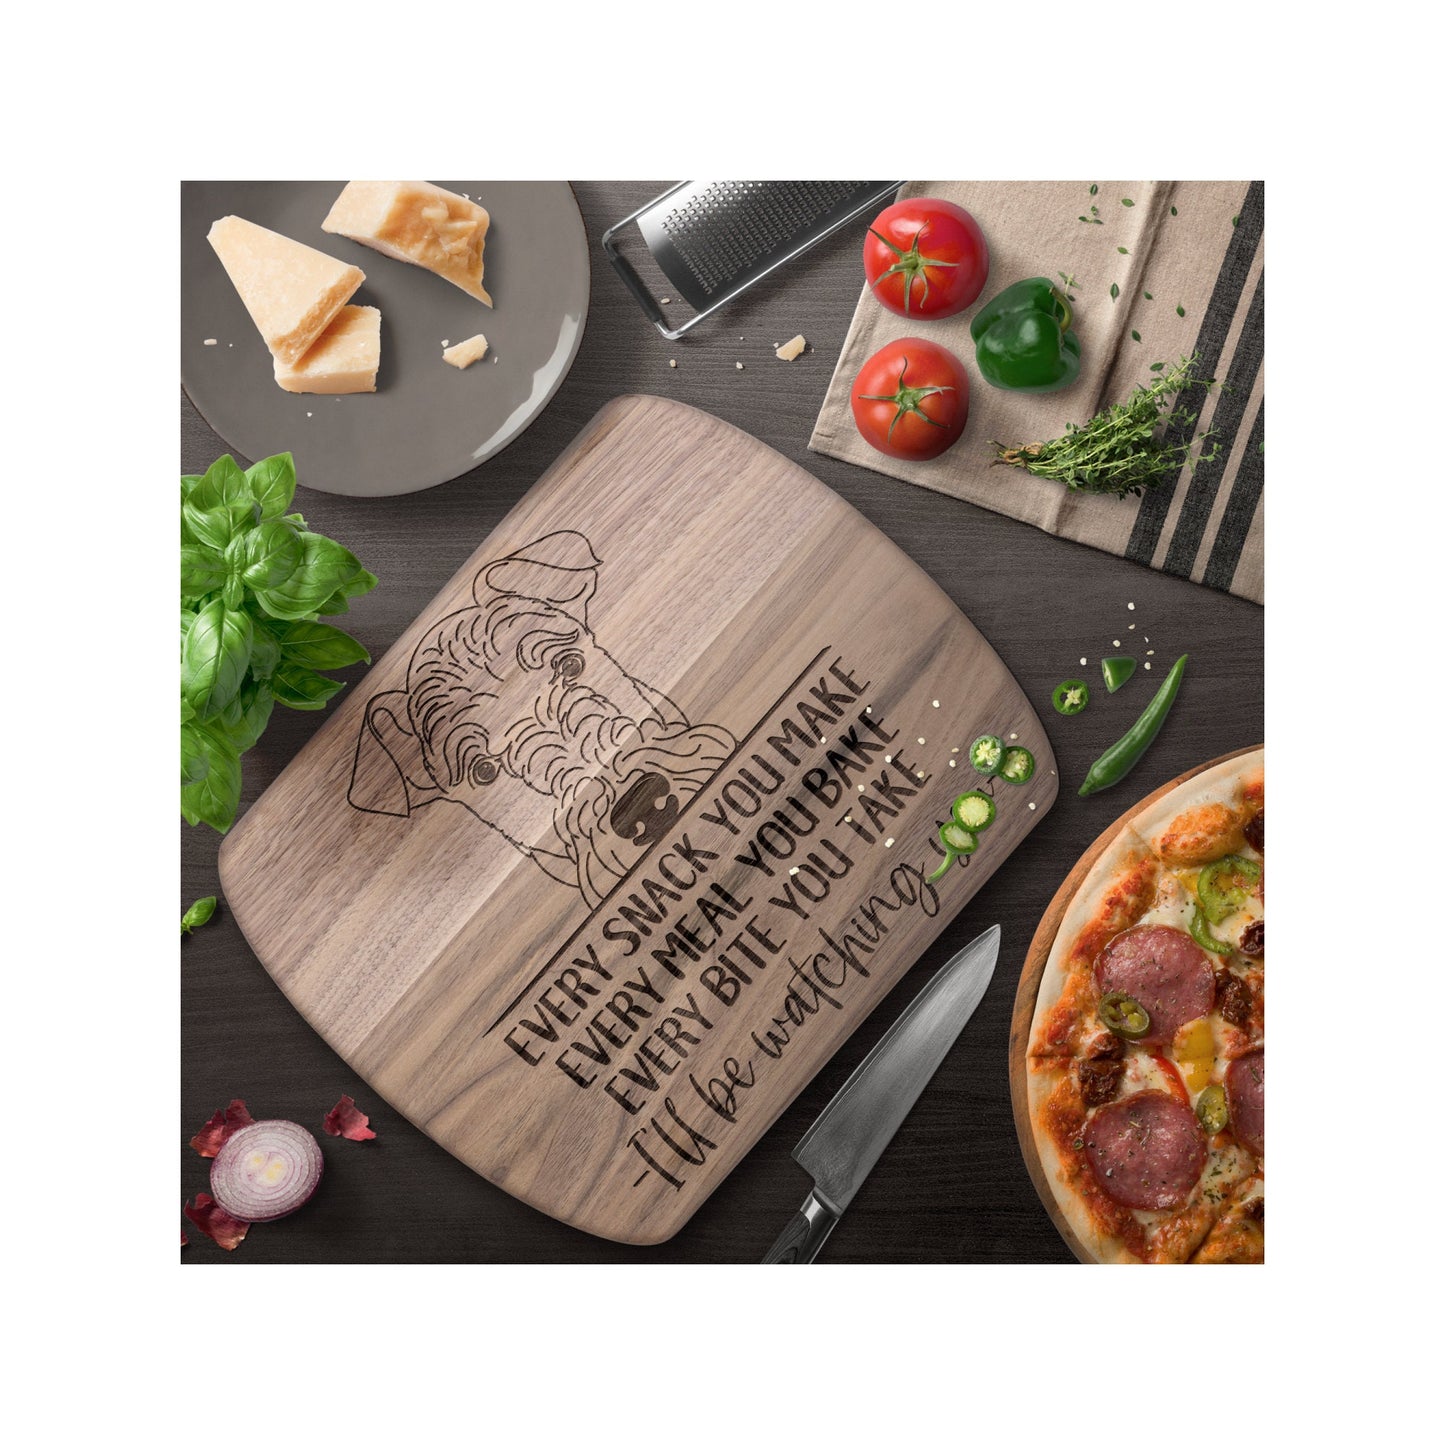 Airedale Terrier Snack Funny Cutting Board for Dog Mom, Dog Lover Wood Serving Board, Charcuterie Board, Wooden Chopping Board Gifts for Him